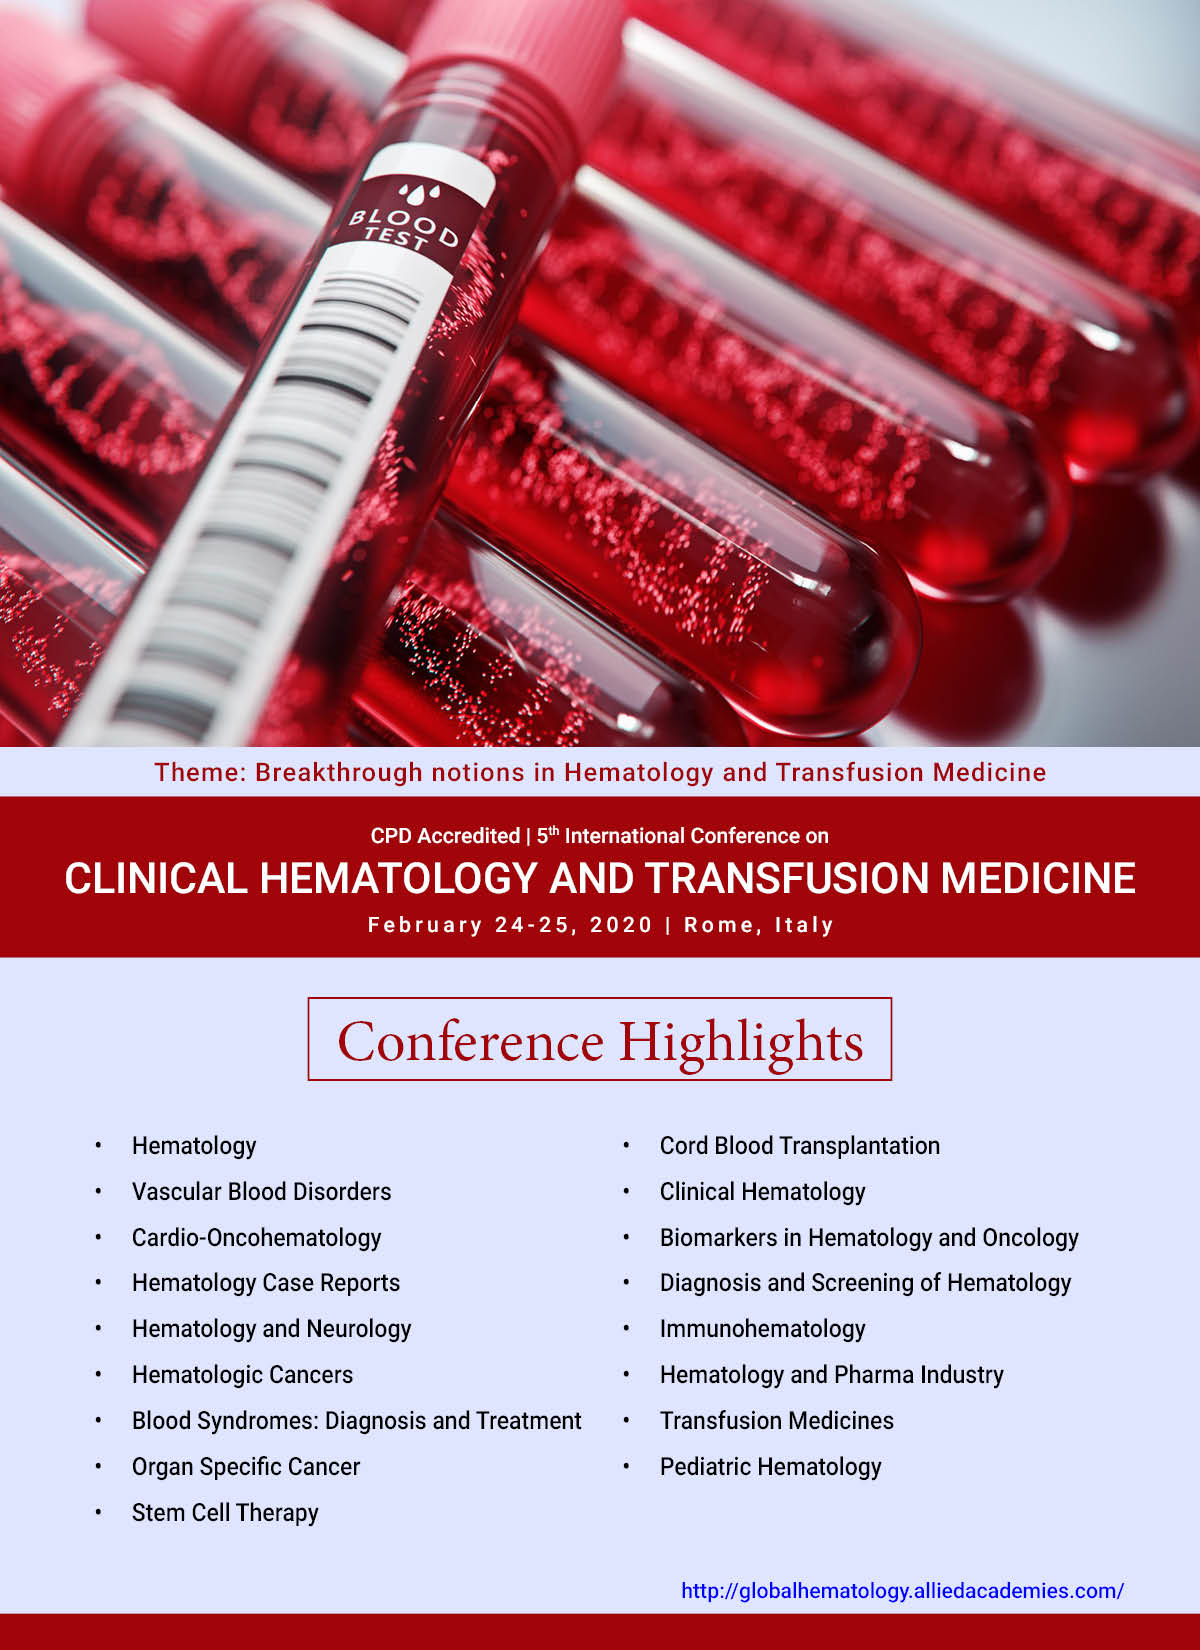 5th International Conference on Clinical Hematology and Transfusion Medicine, London, Italy